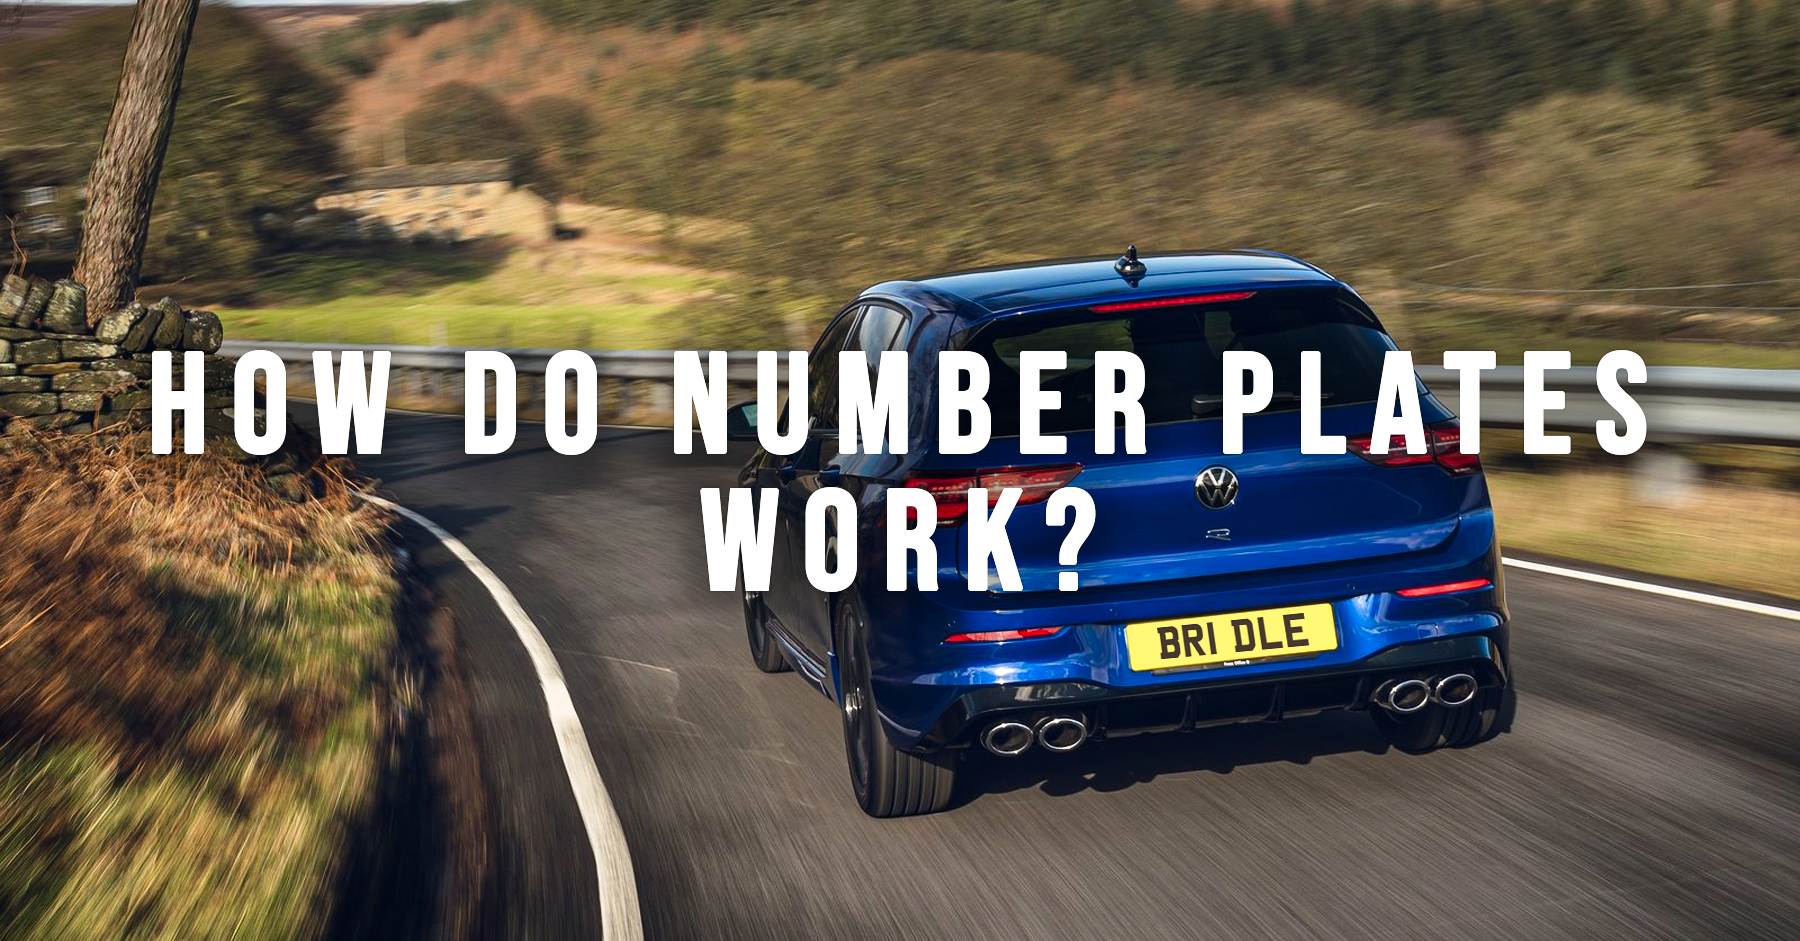 How do number plates work?